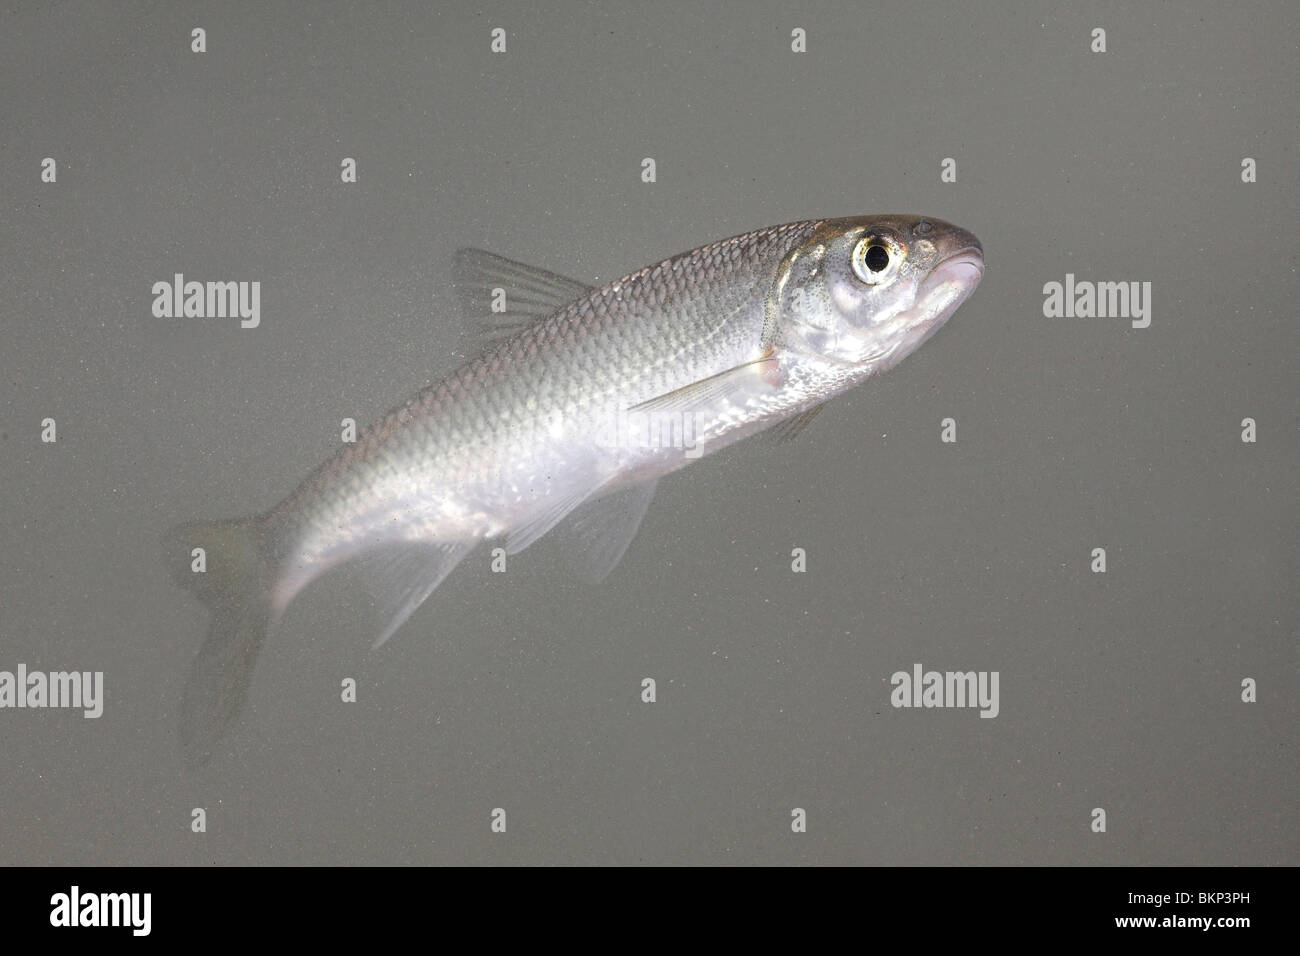 photo of a dace swimming in the water against a light grey background Stock Photo